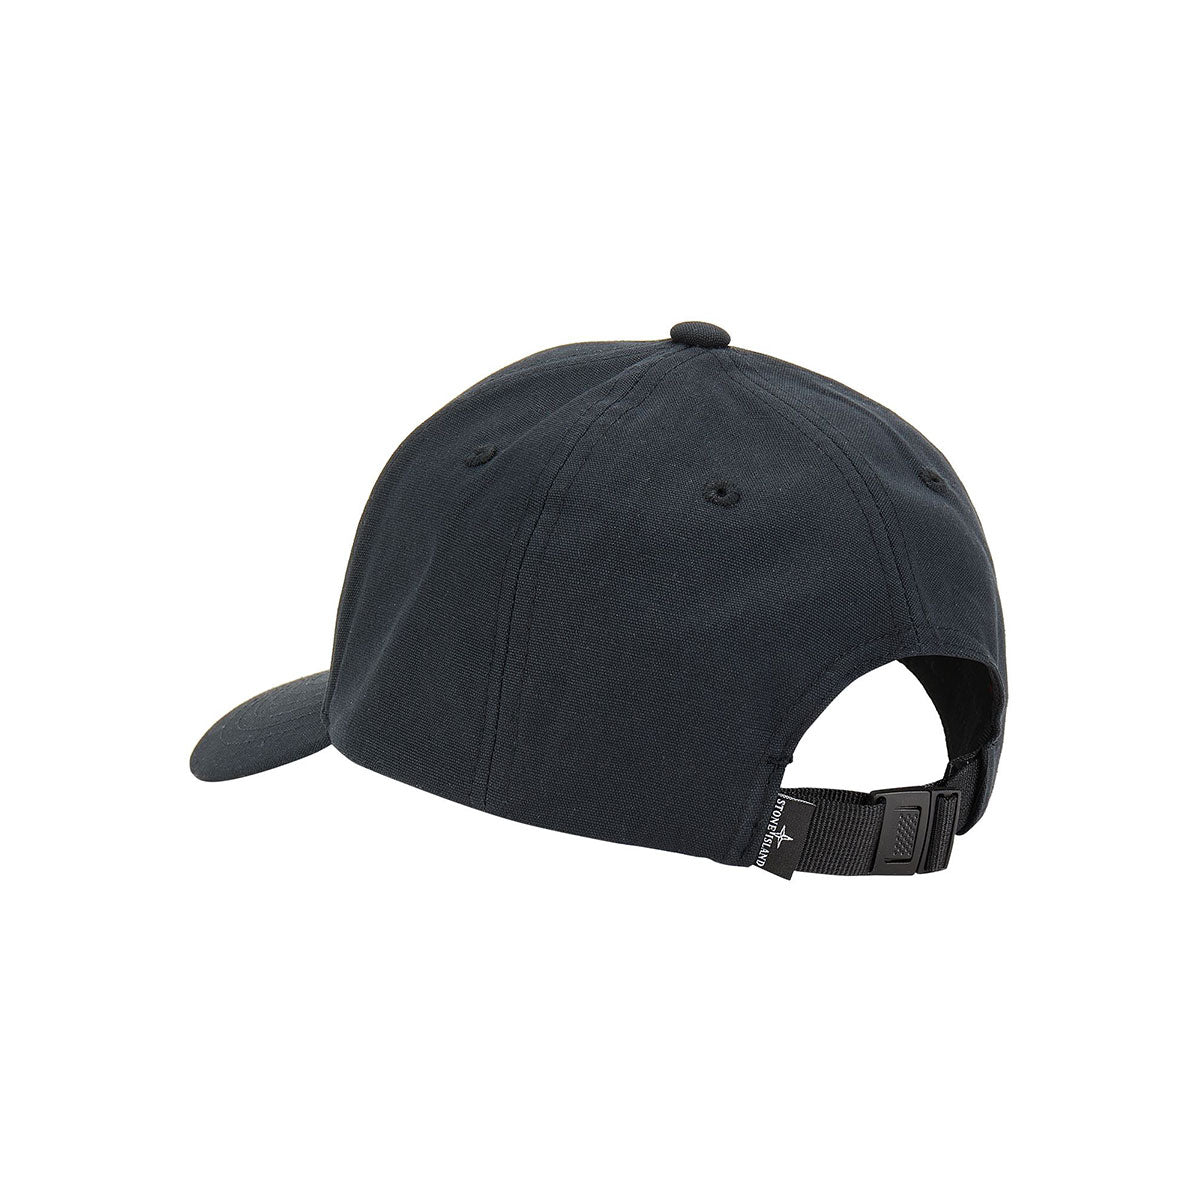 COTTON REP CAP - Why are you here?